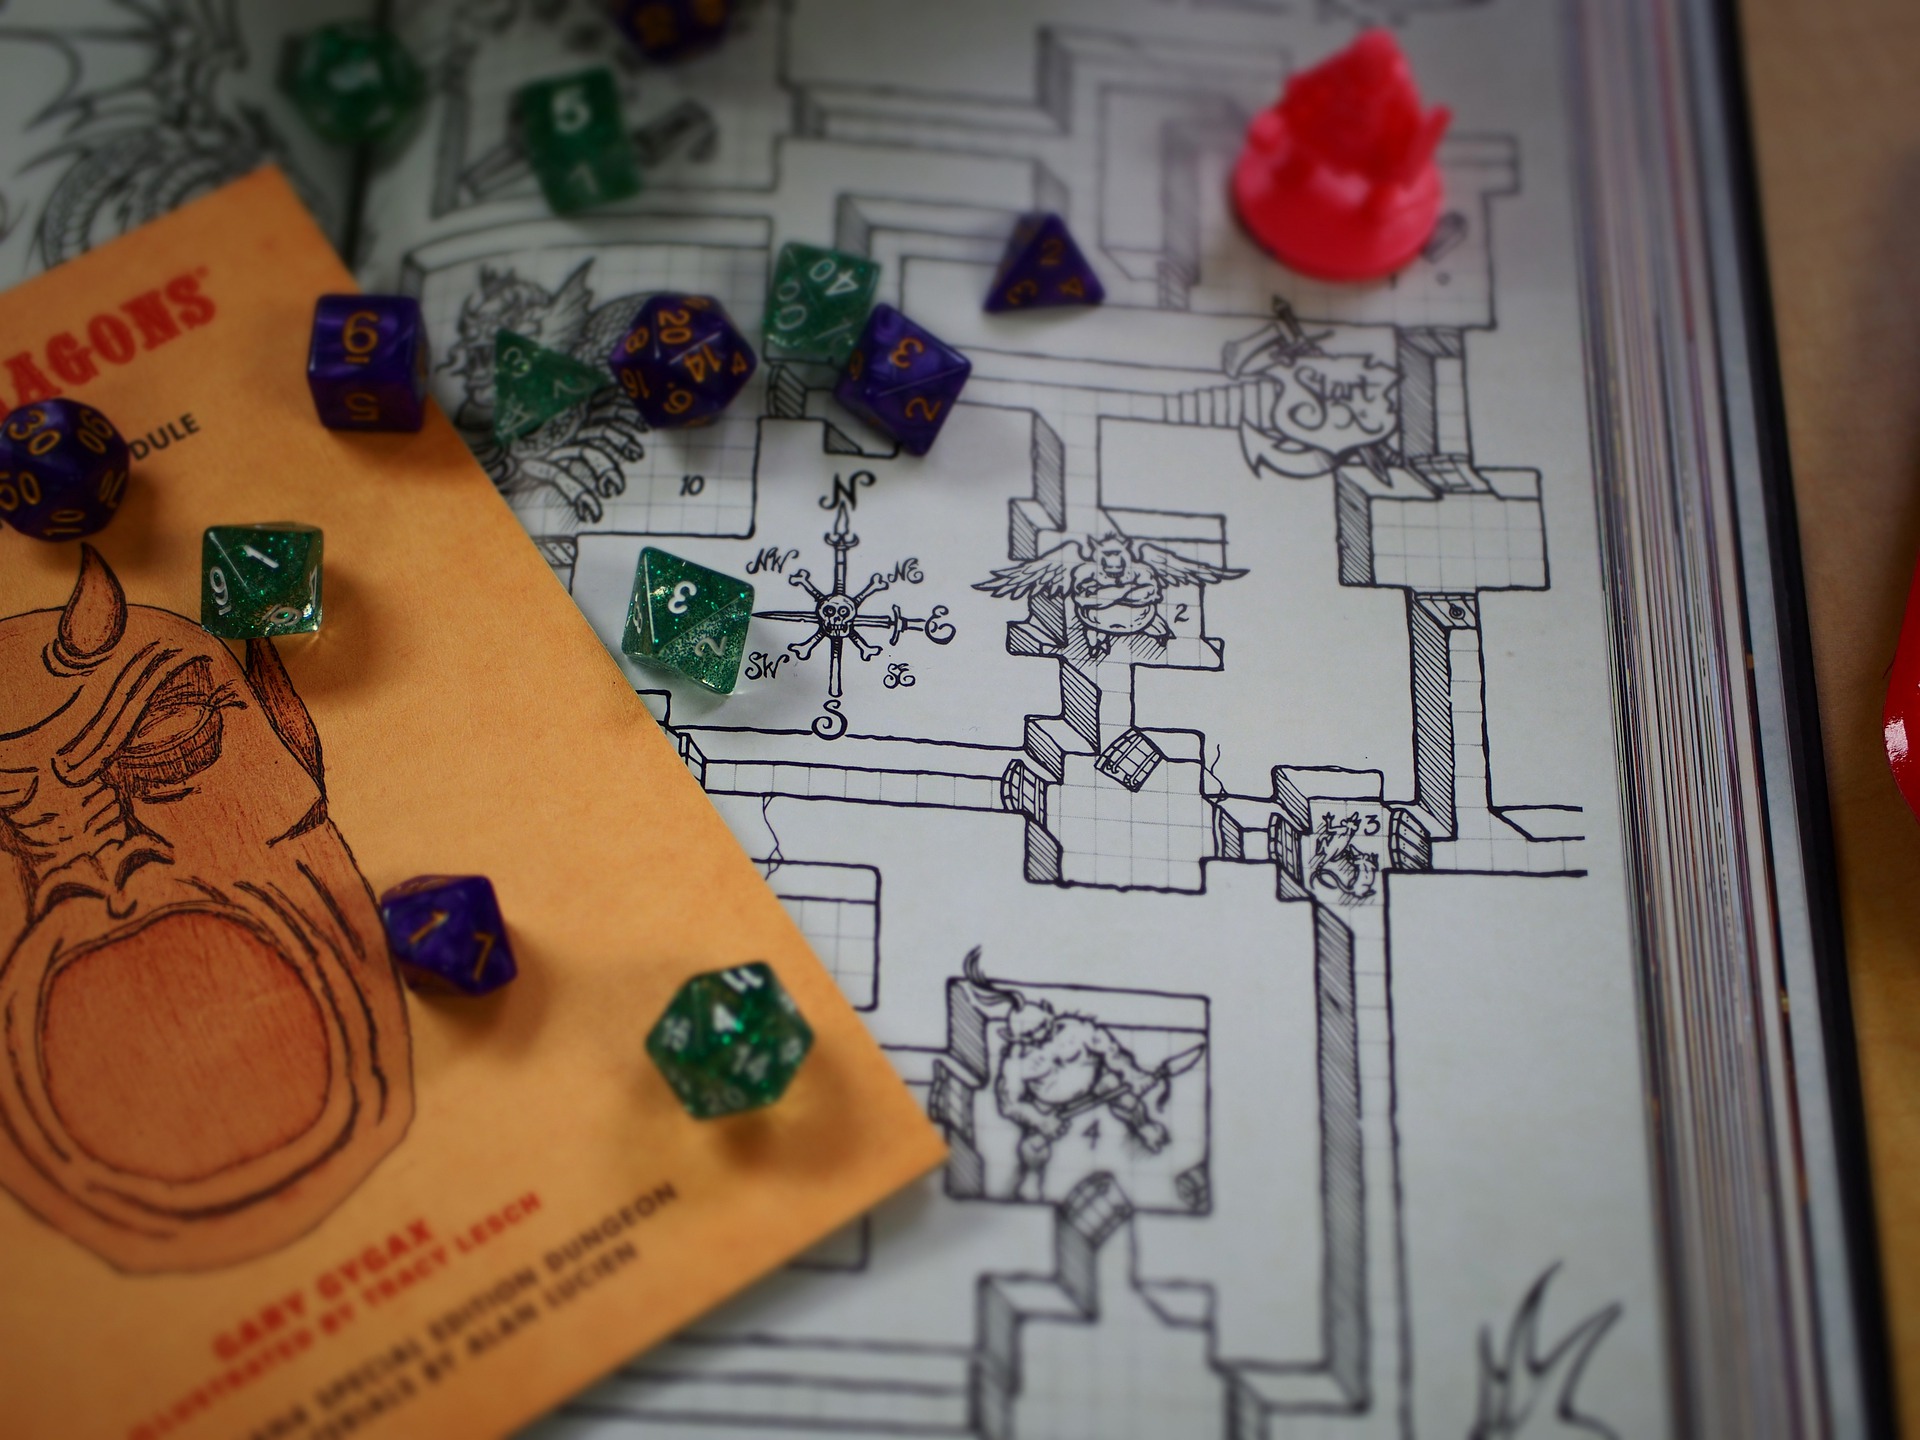 Dice scattered over a dungeon map and a copy of an old D&D rules booklet.